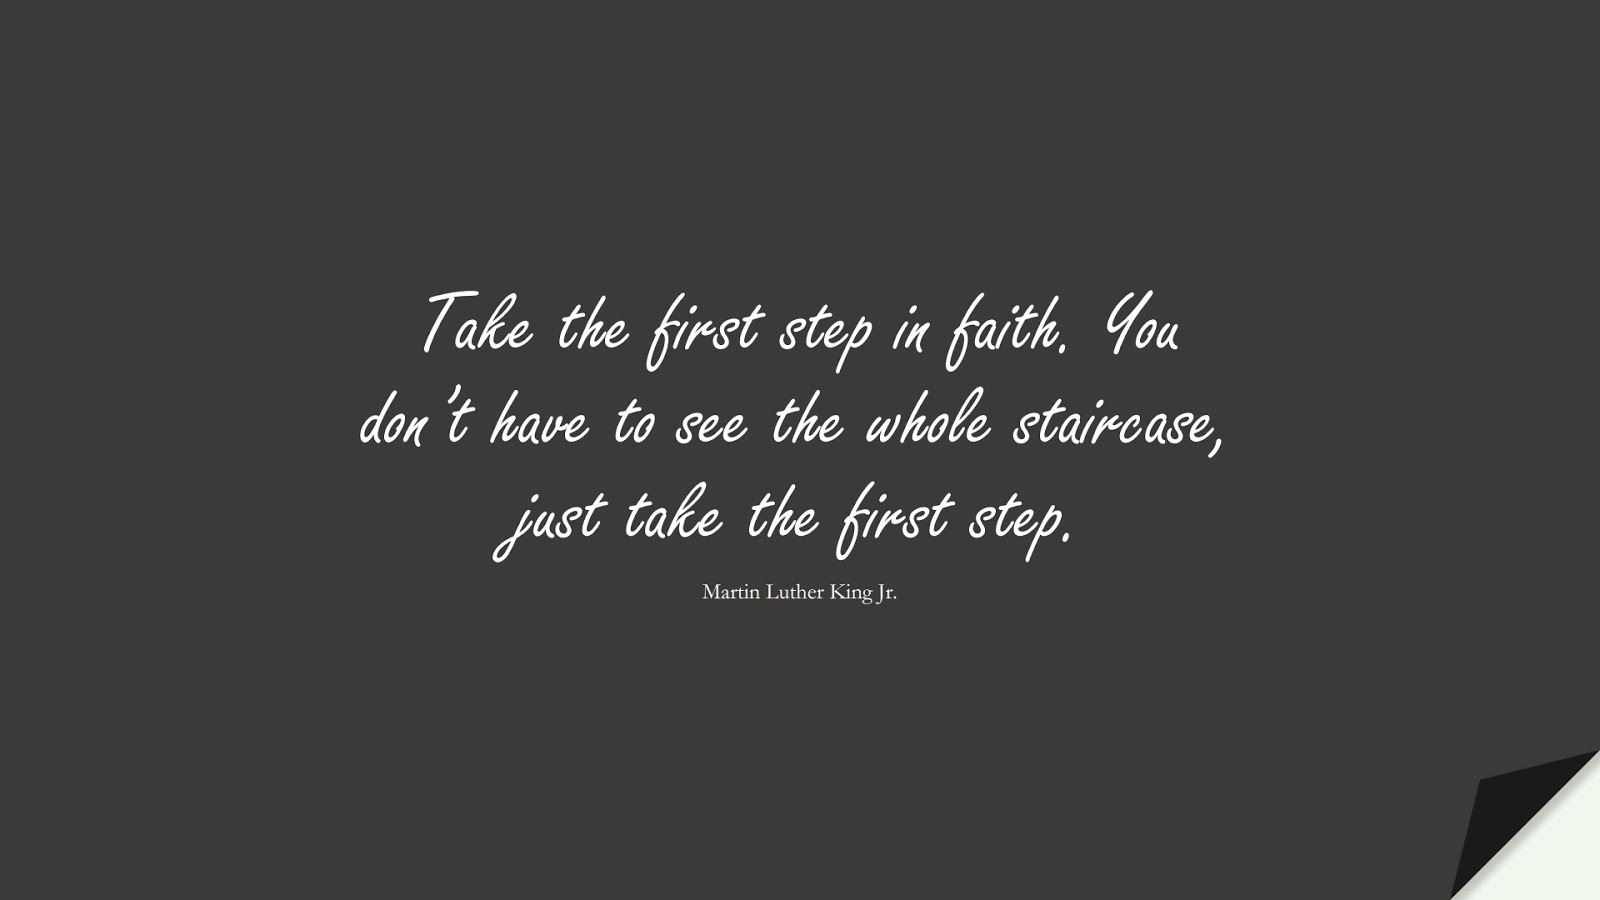 Take the first step in faith. You don’t have to see the whole staircase, just take the first step. (Martin Luther King Jr.);  #MartinLutherKingJrQuotes